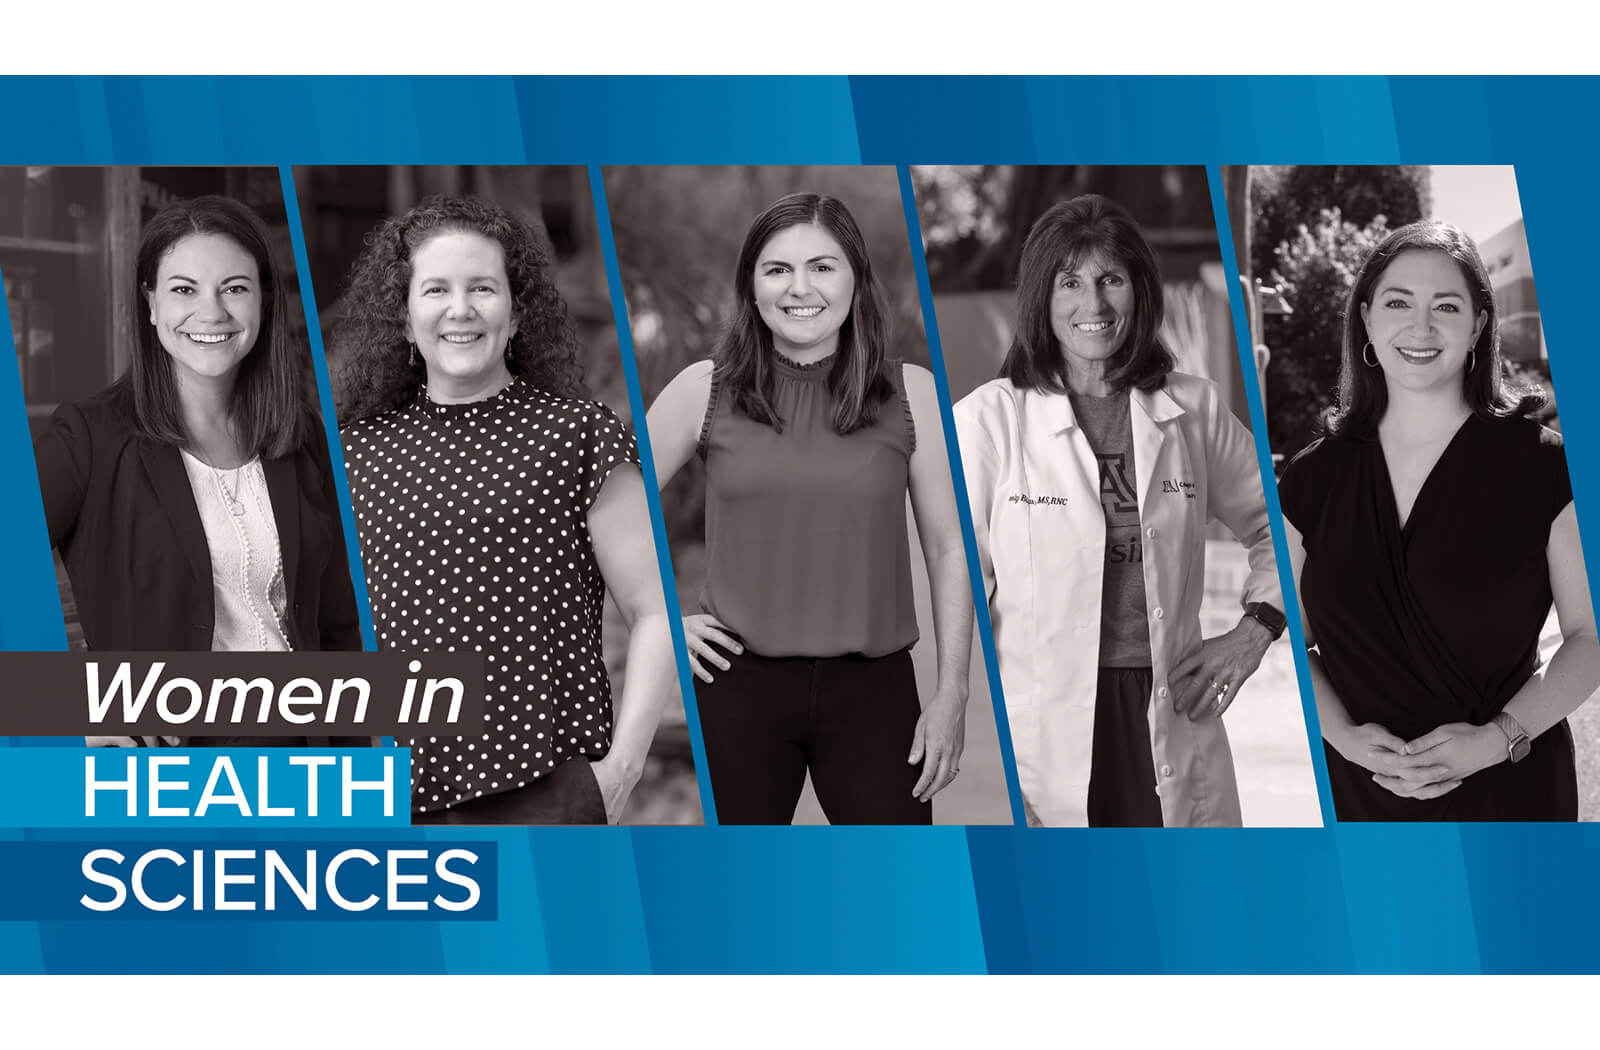 Women in Health Sciences collage